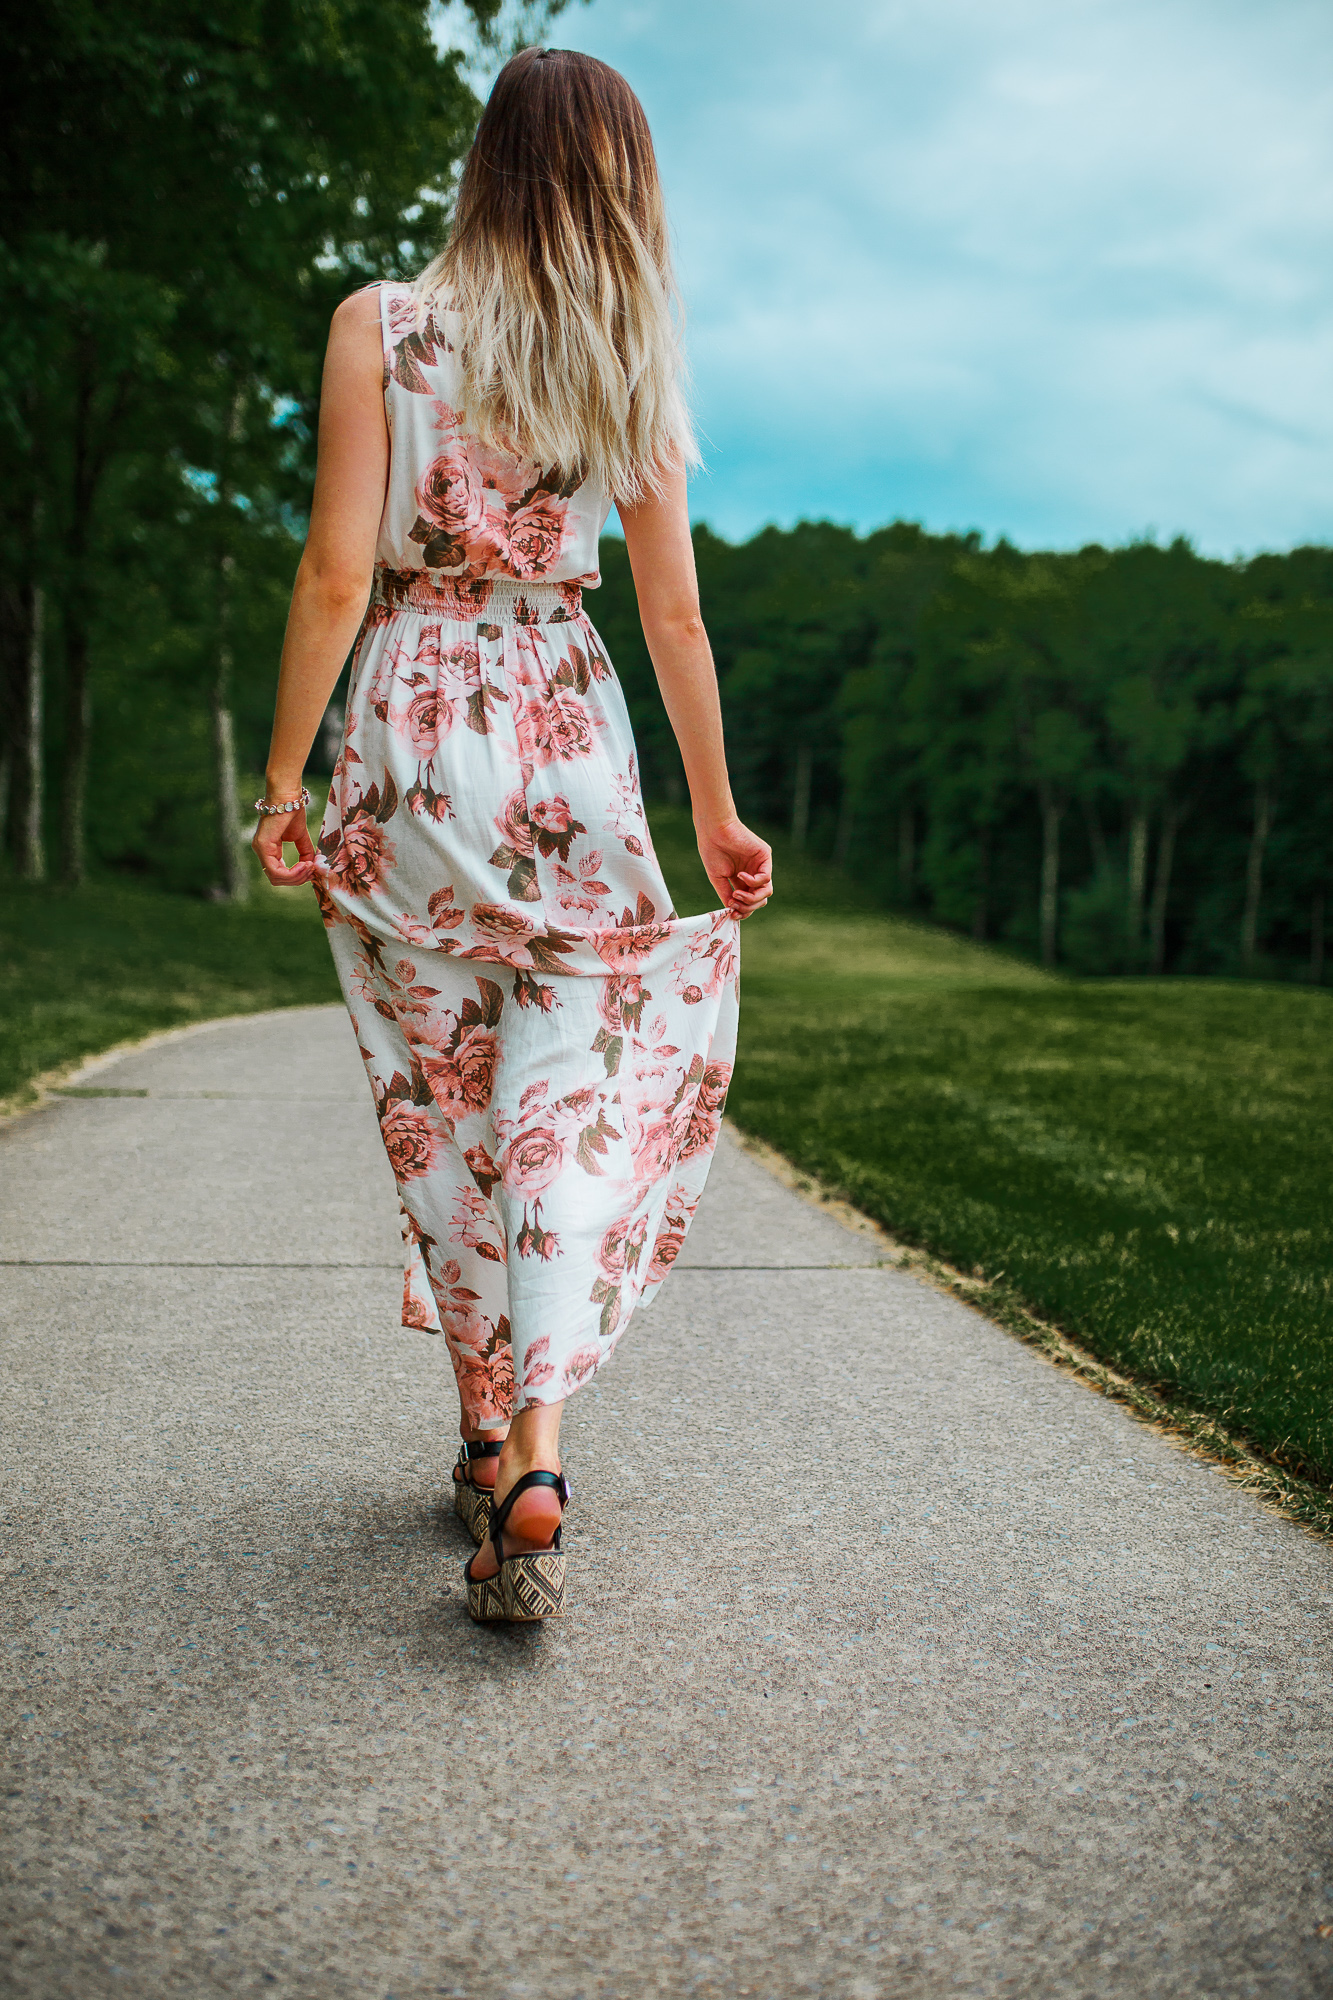 Summer Floral Print Maxi Dress, Leather Earrings, an dGold Initial Necklace | Summer Outfit Inspiration by North Carolina fashion and lifestyle blogger Jessica Linn 